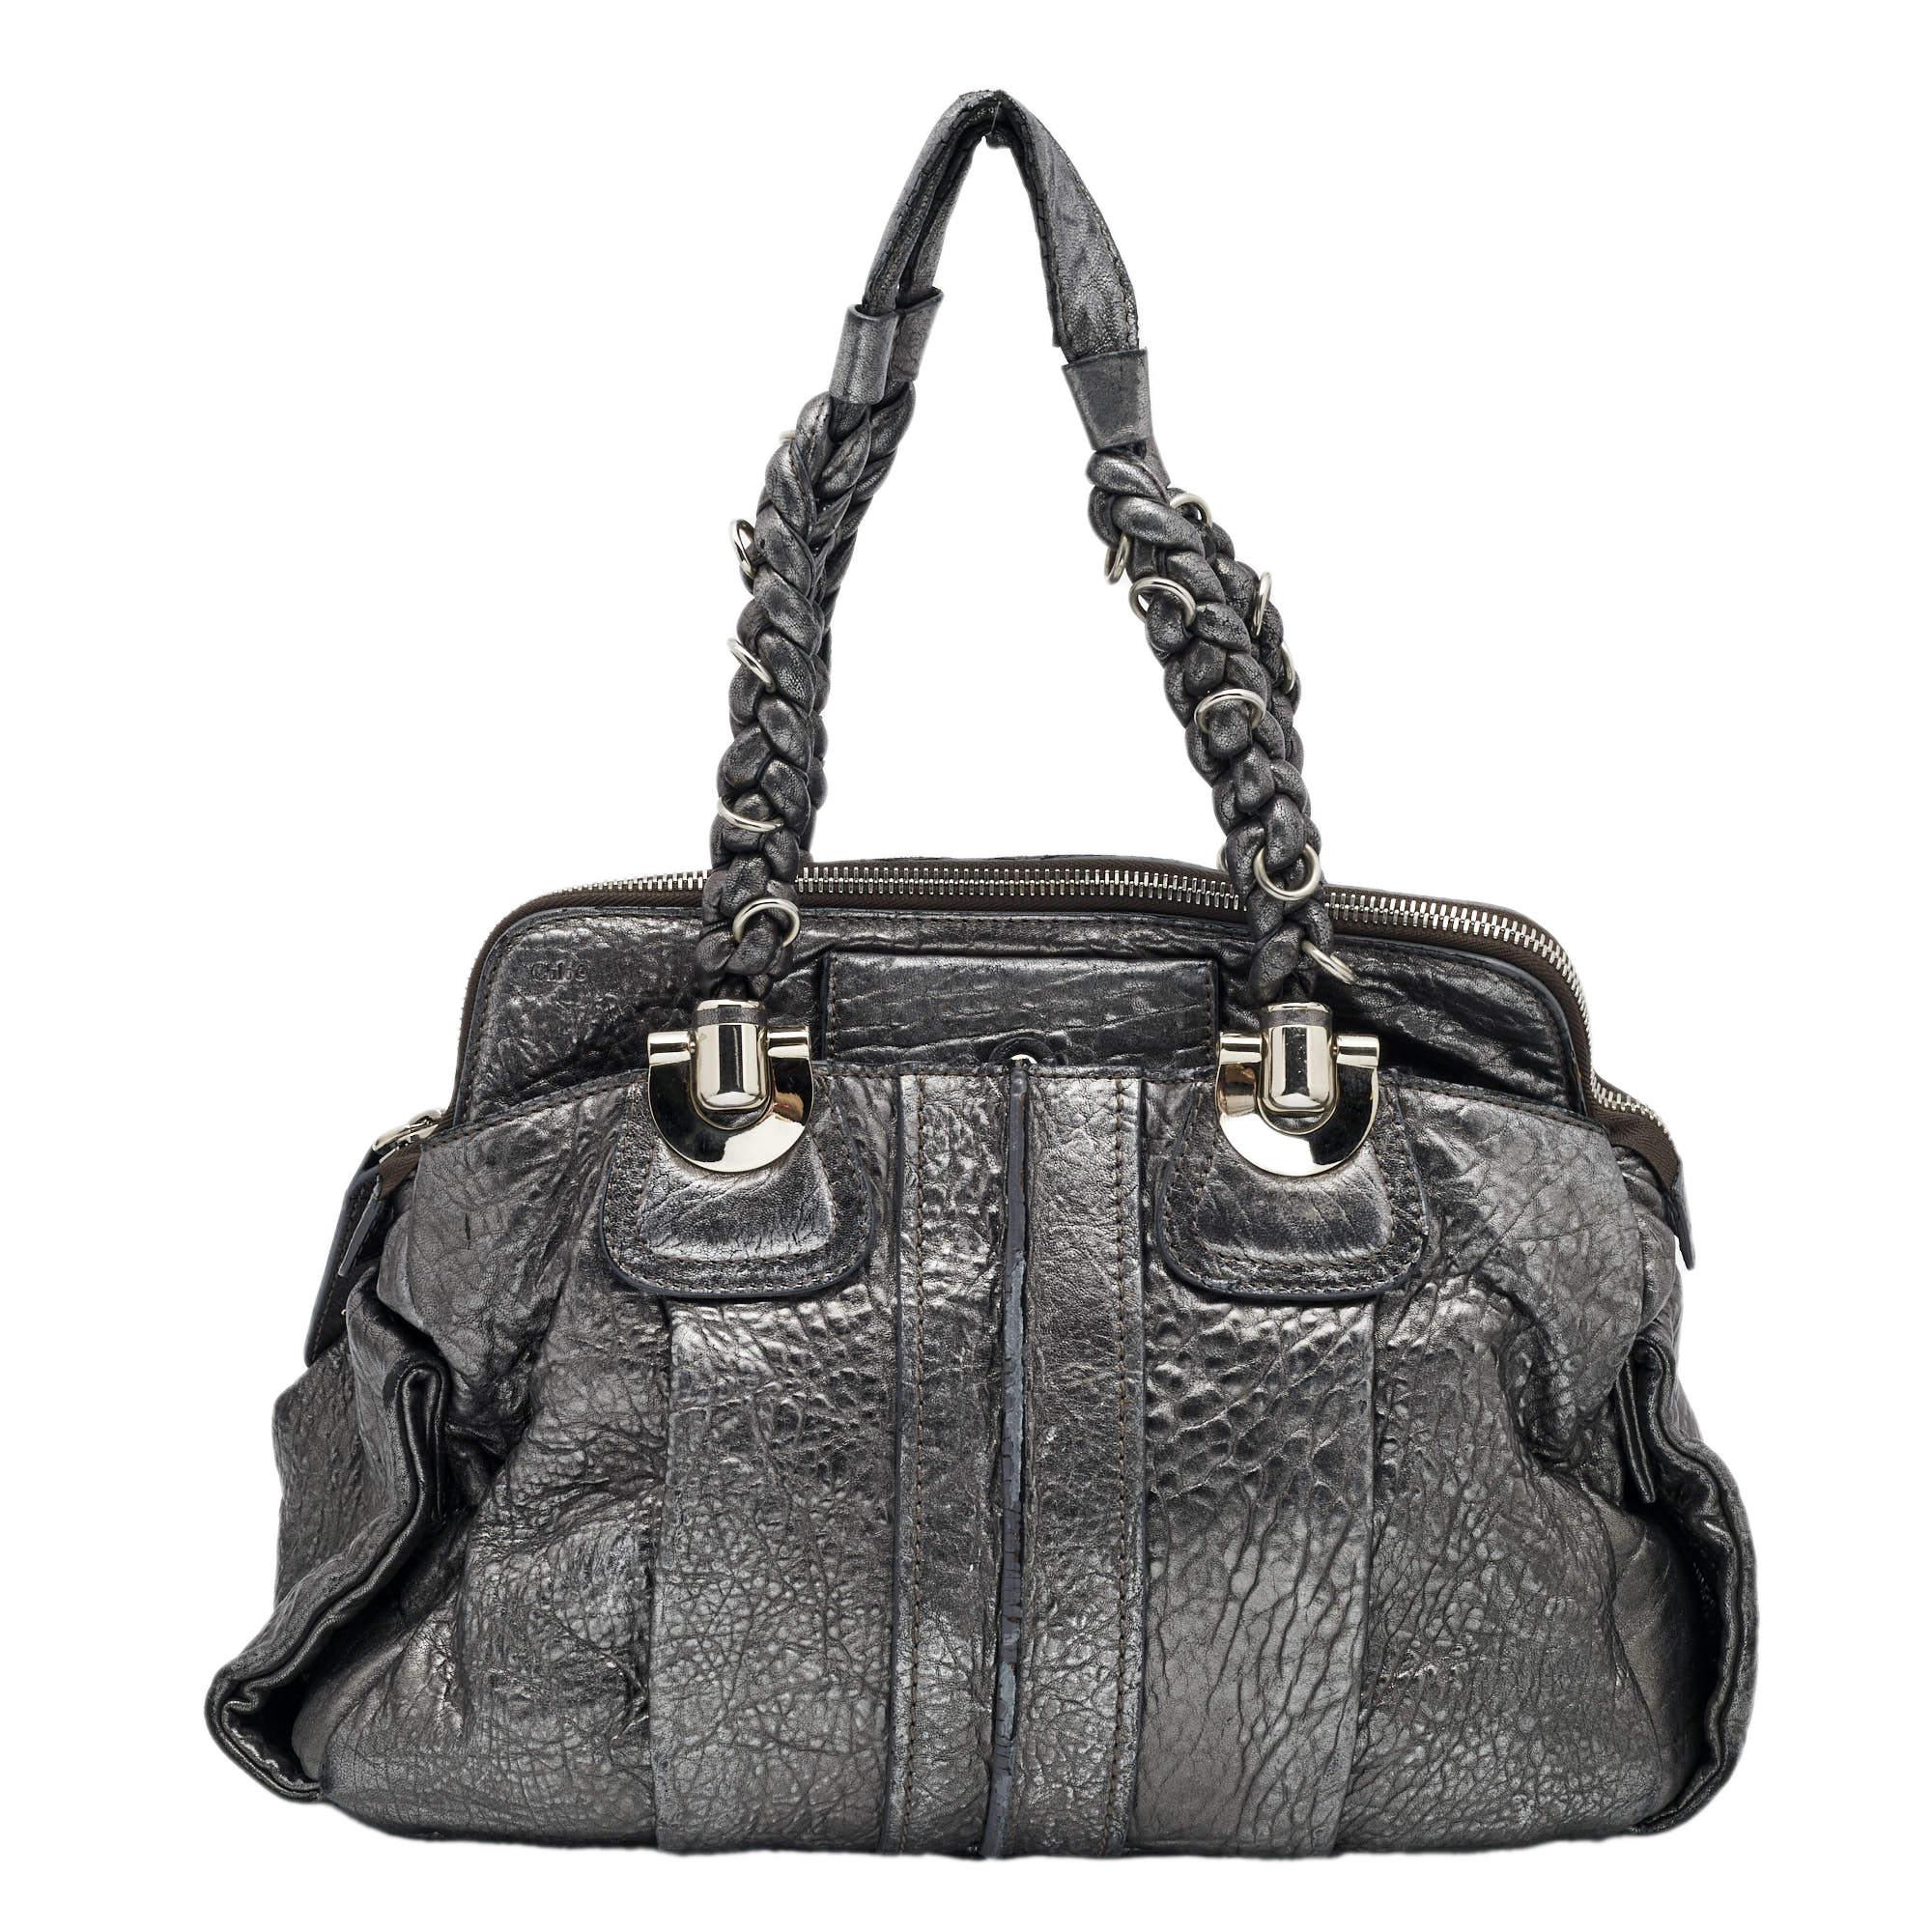 Chloe is known for quality craftsmanship in its designs and this satchel is a fine example. This elegant bag has been crafted from leather into a beautiful structure. The bag is equipped with a spacious fabric interior and two braided handles. Get